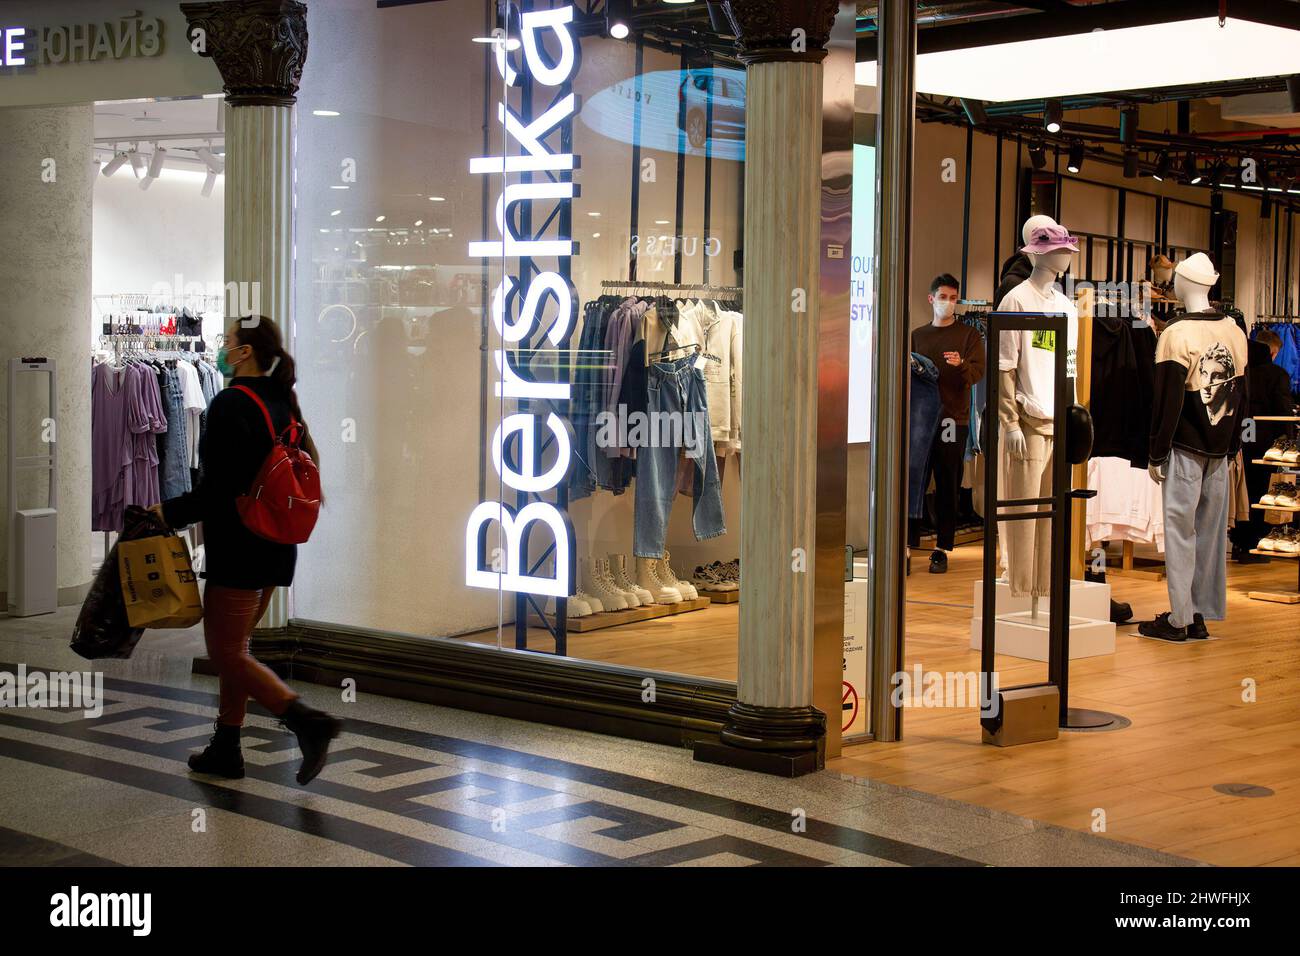 berouw hebben cilinder schermutseling A woman passes by Bershka boutique in Moscow. The Spanish fashion retailer  Inditex, which owns such brands as Zara, Bershka, Pull&Bear, Massimo Dutti,  Stradivarius, and others, announced it was halting trading in